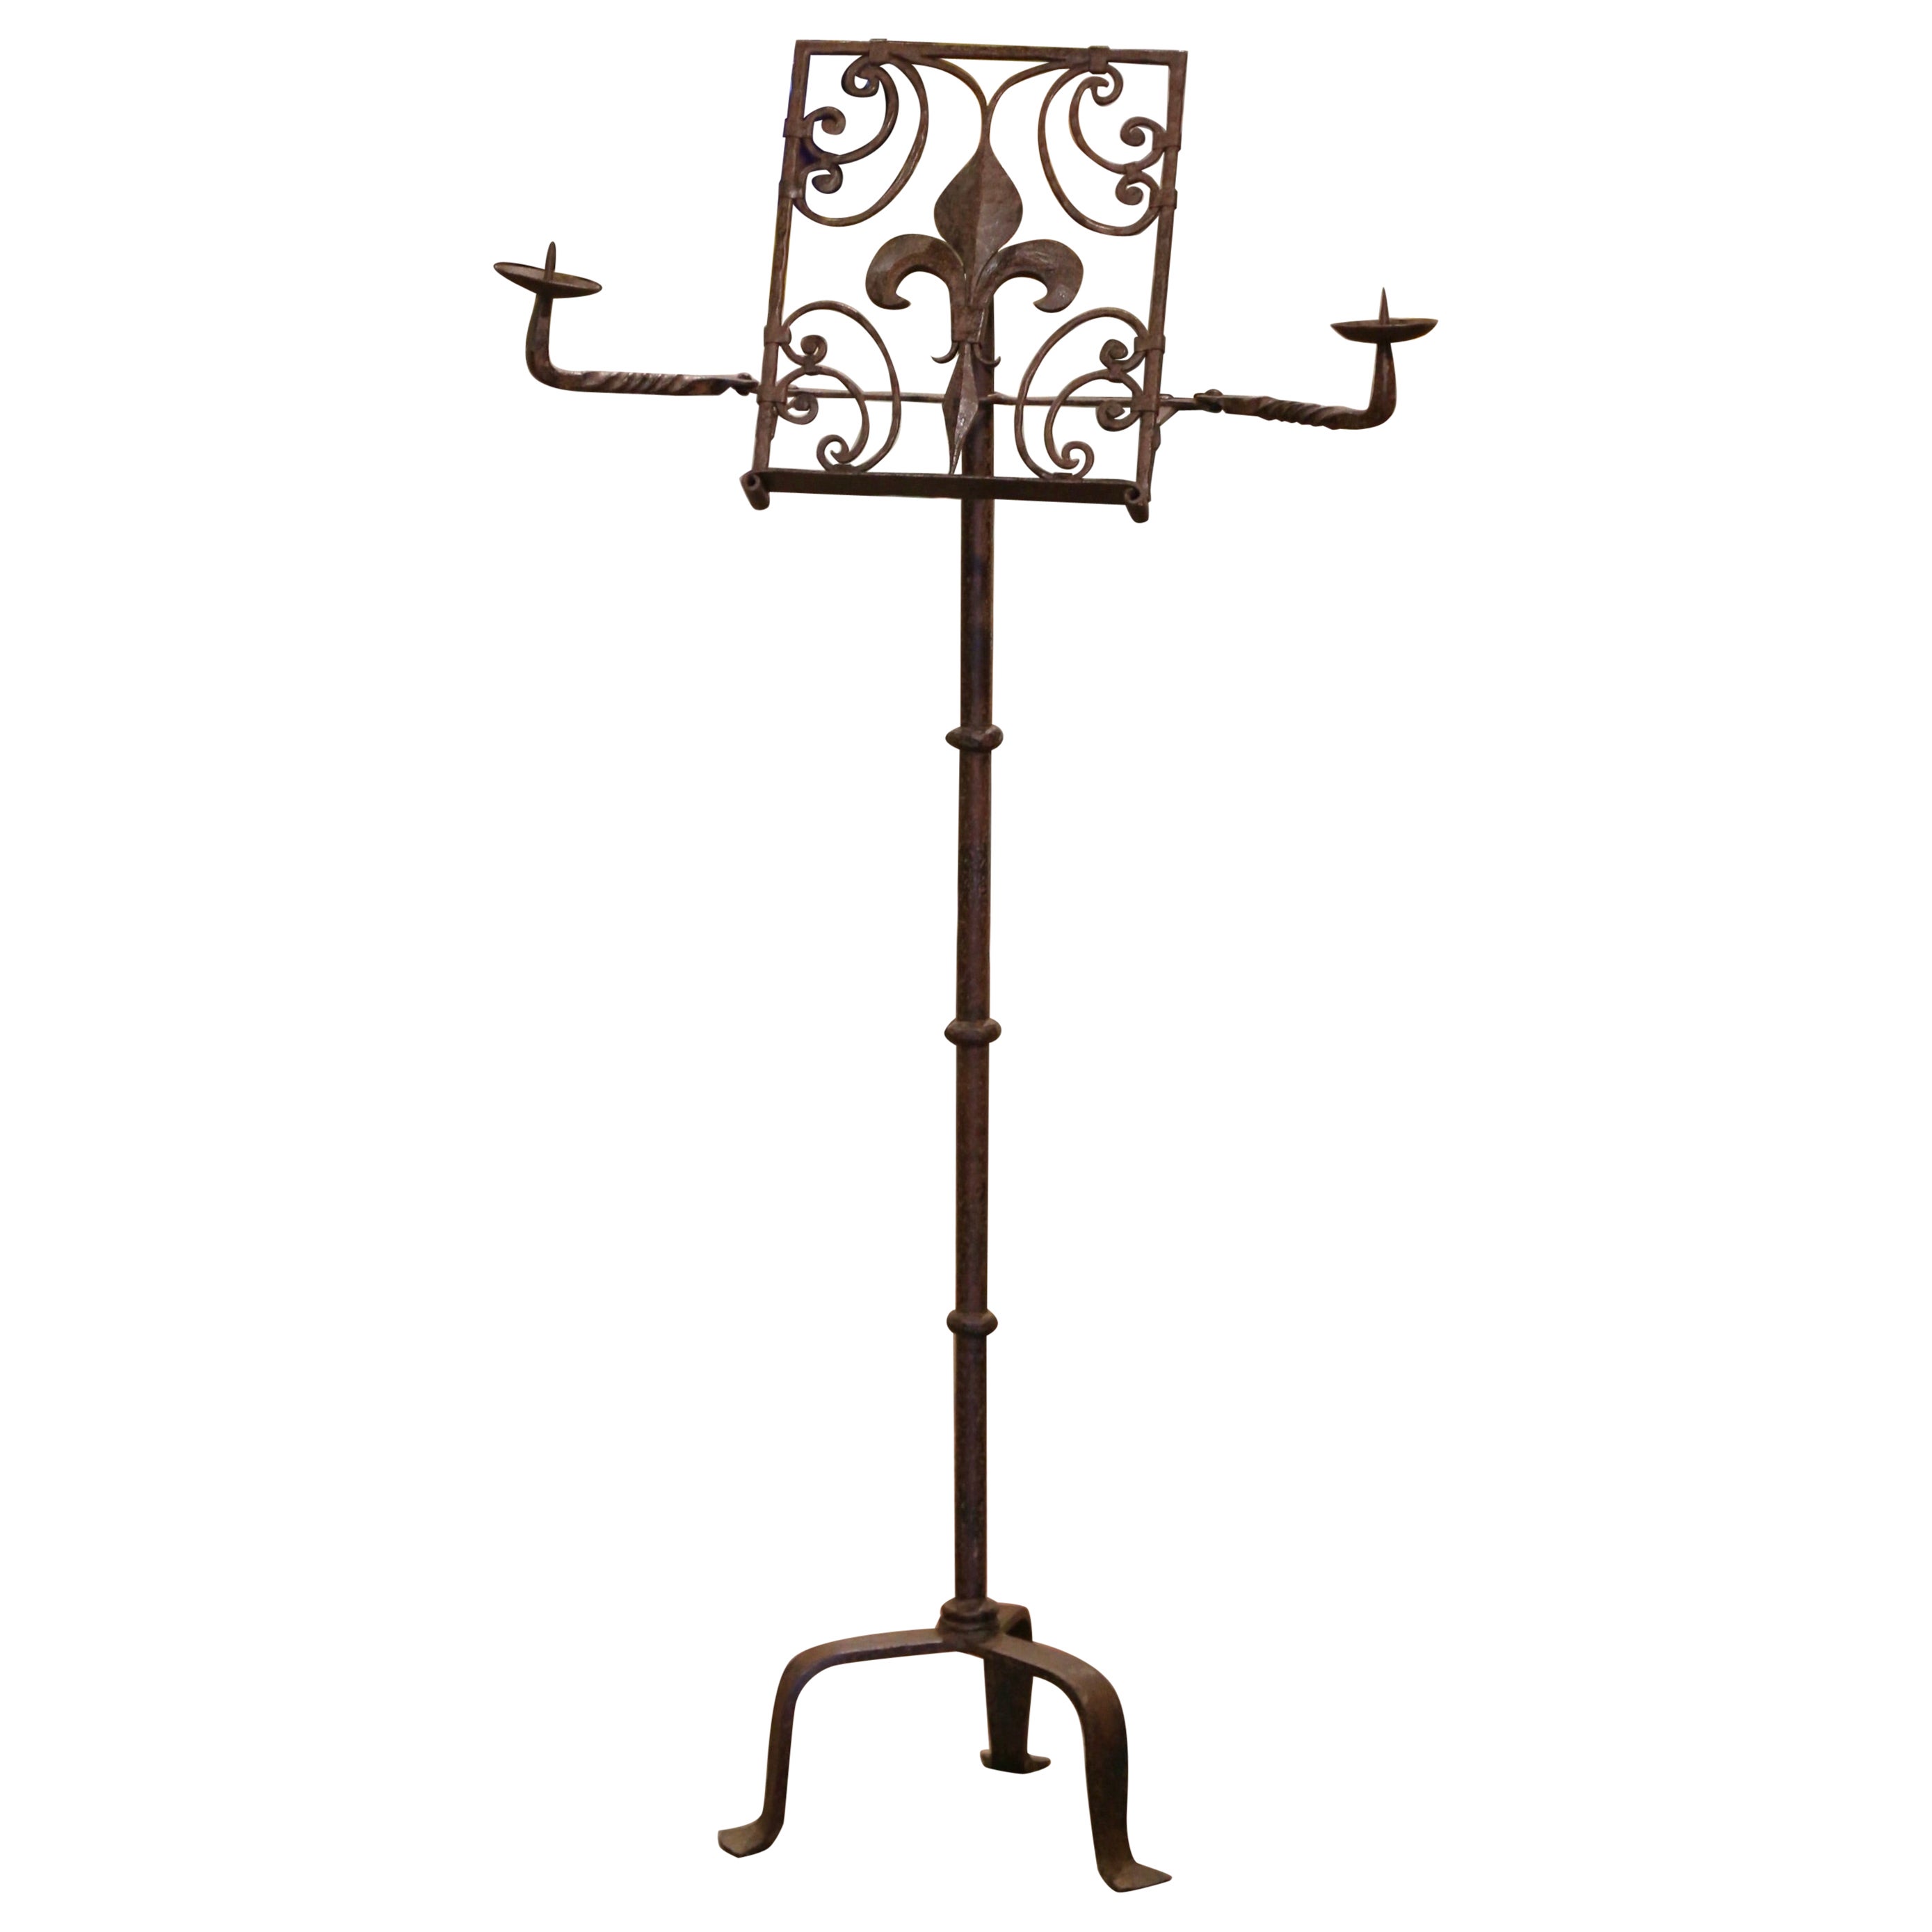 19th Century French Forged Iron Music Stand Lectern with Fleur-de-Lys Decor